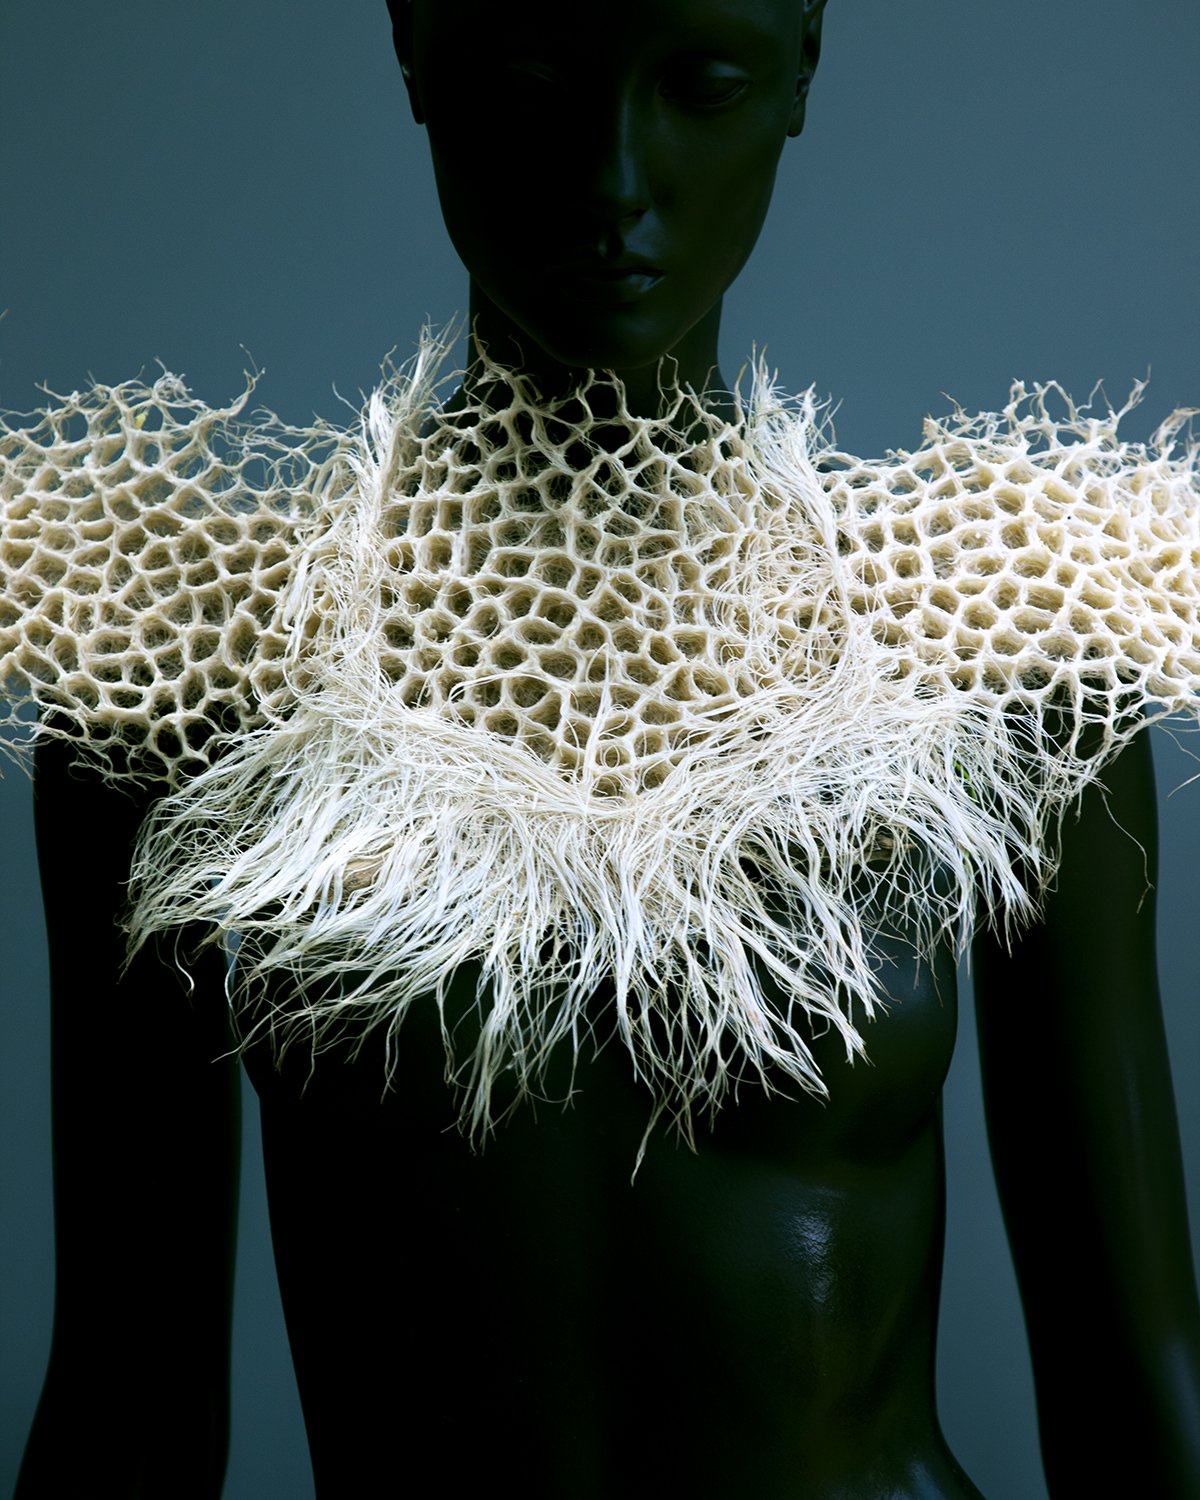 White collar grown from root, inspired by coral by Zena Holloway